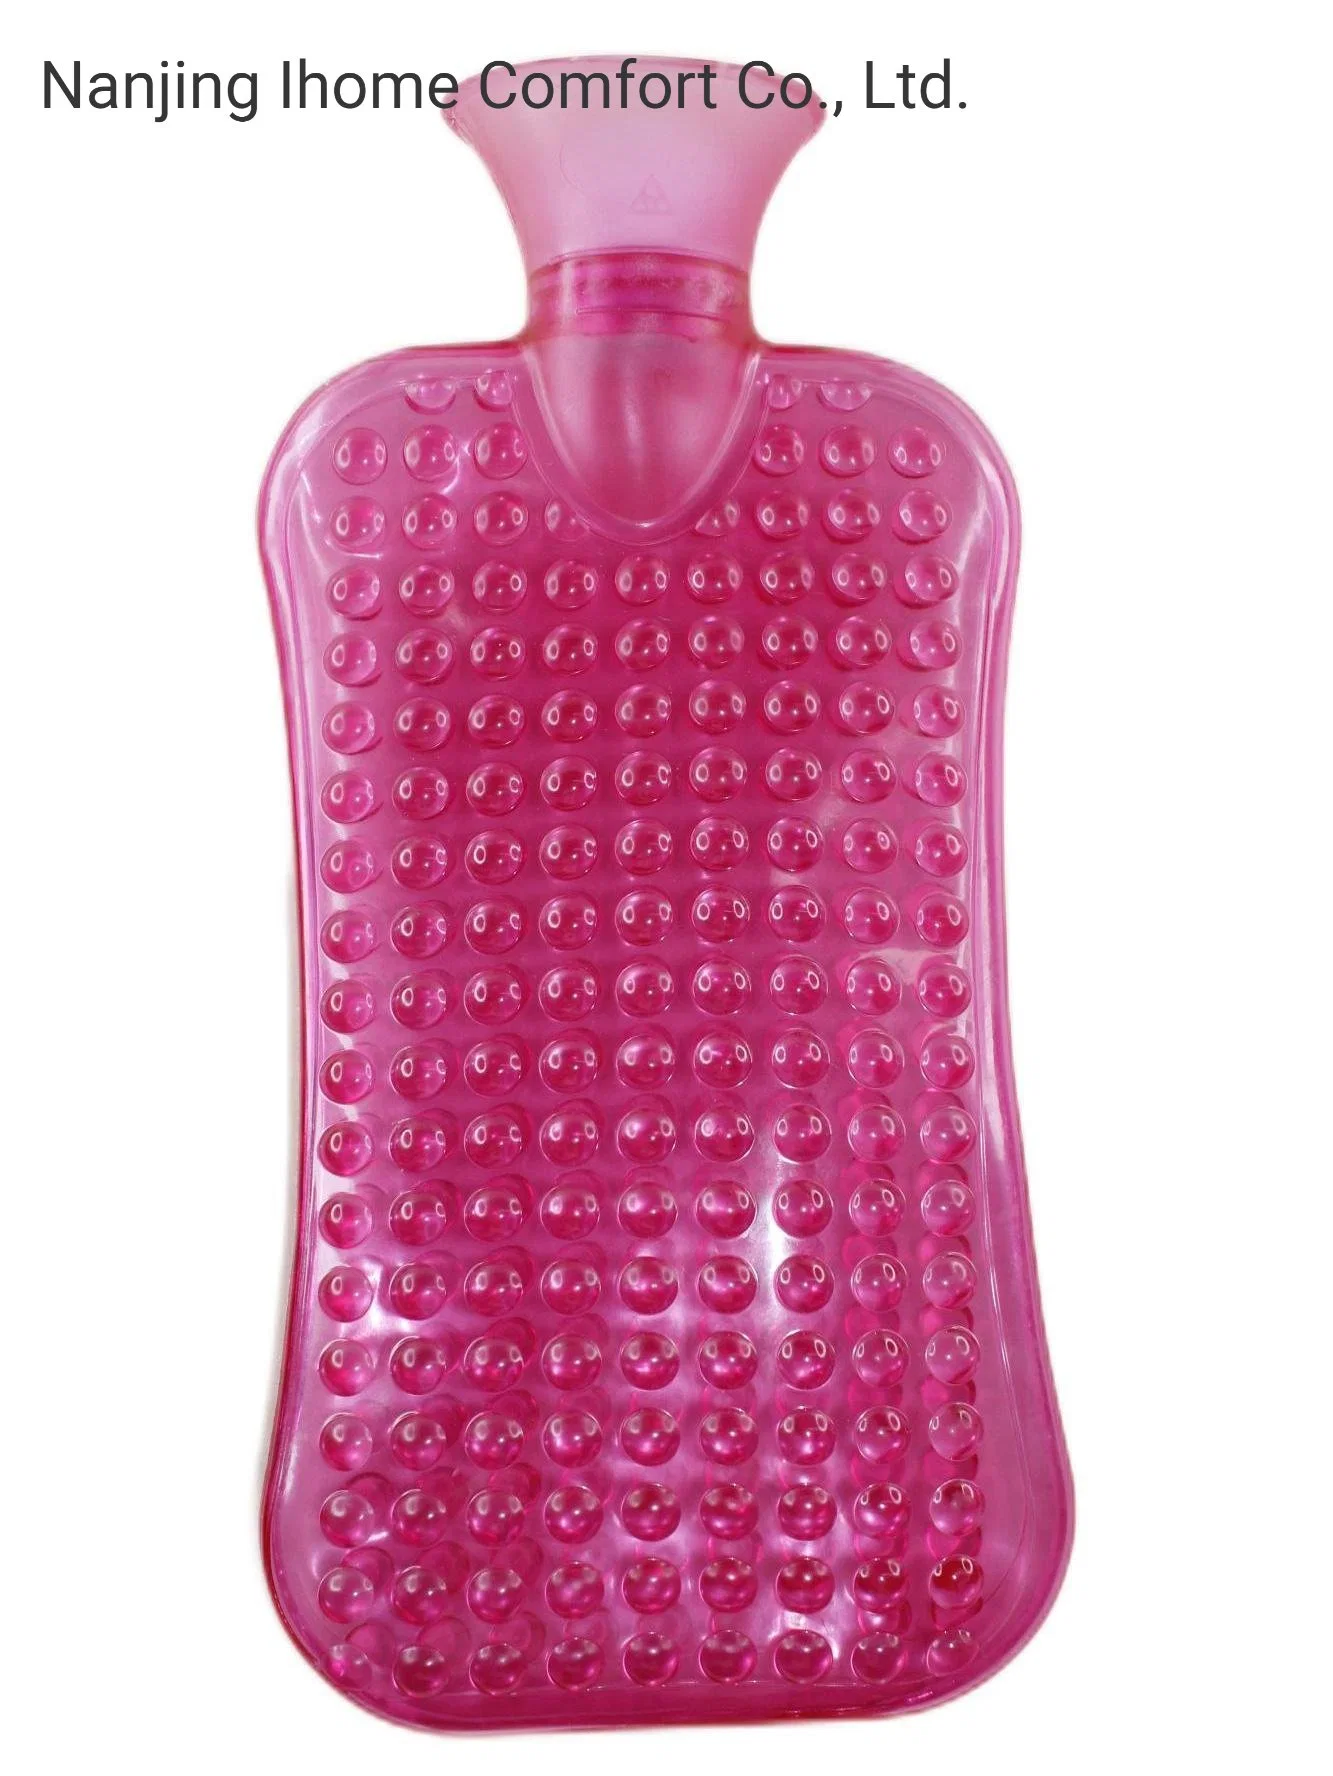 Factory Supply Classic Colorful Soft and Strong 100% Leak Proof BS 1970: 2012 Standard Rubber Hot Water Bottle Bag